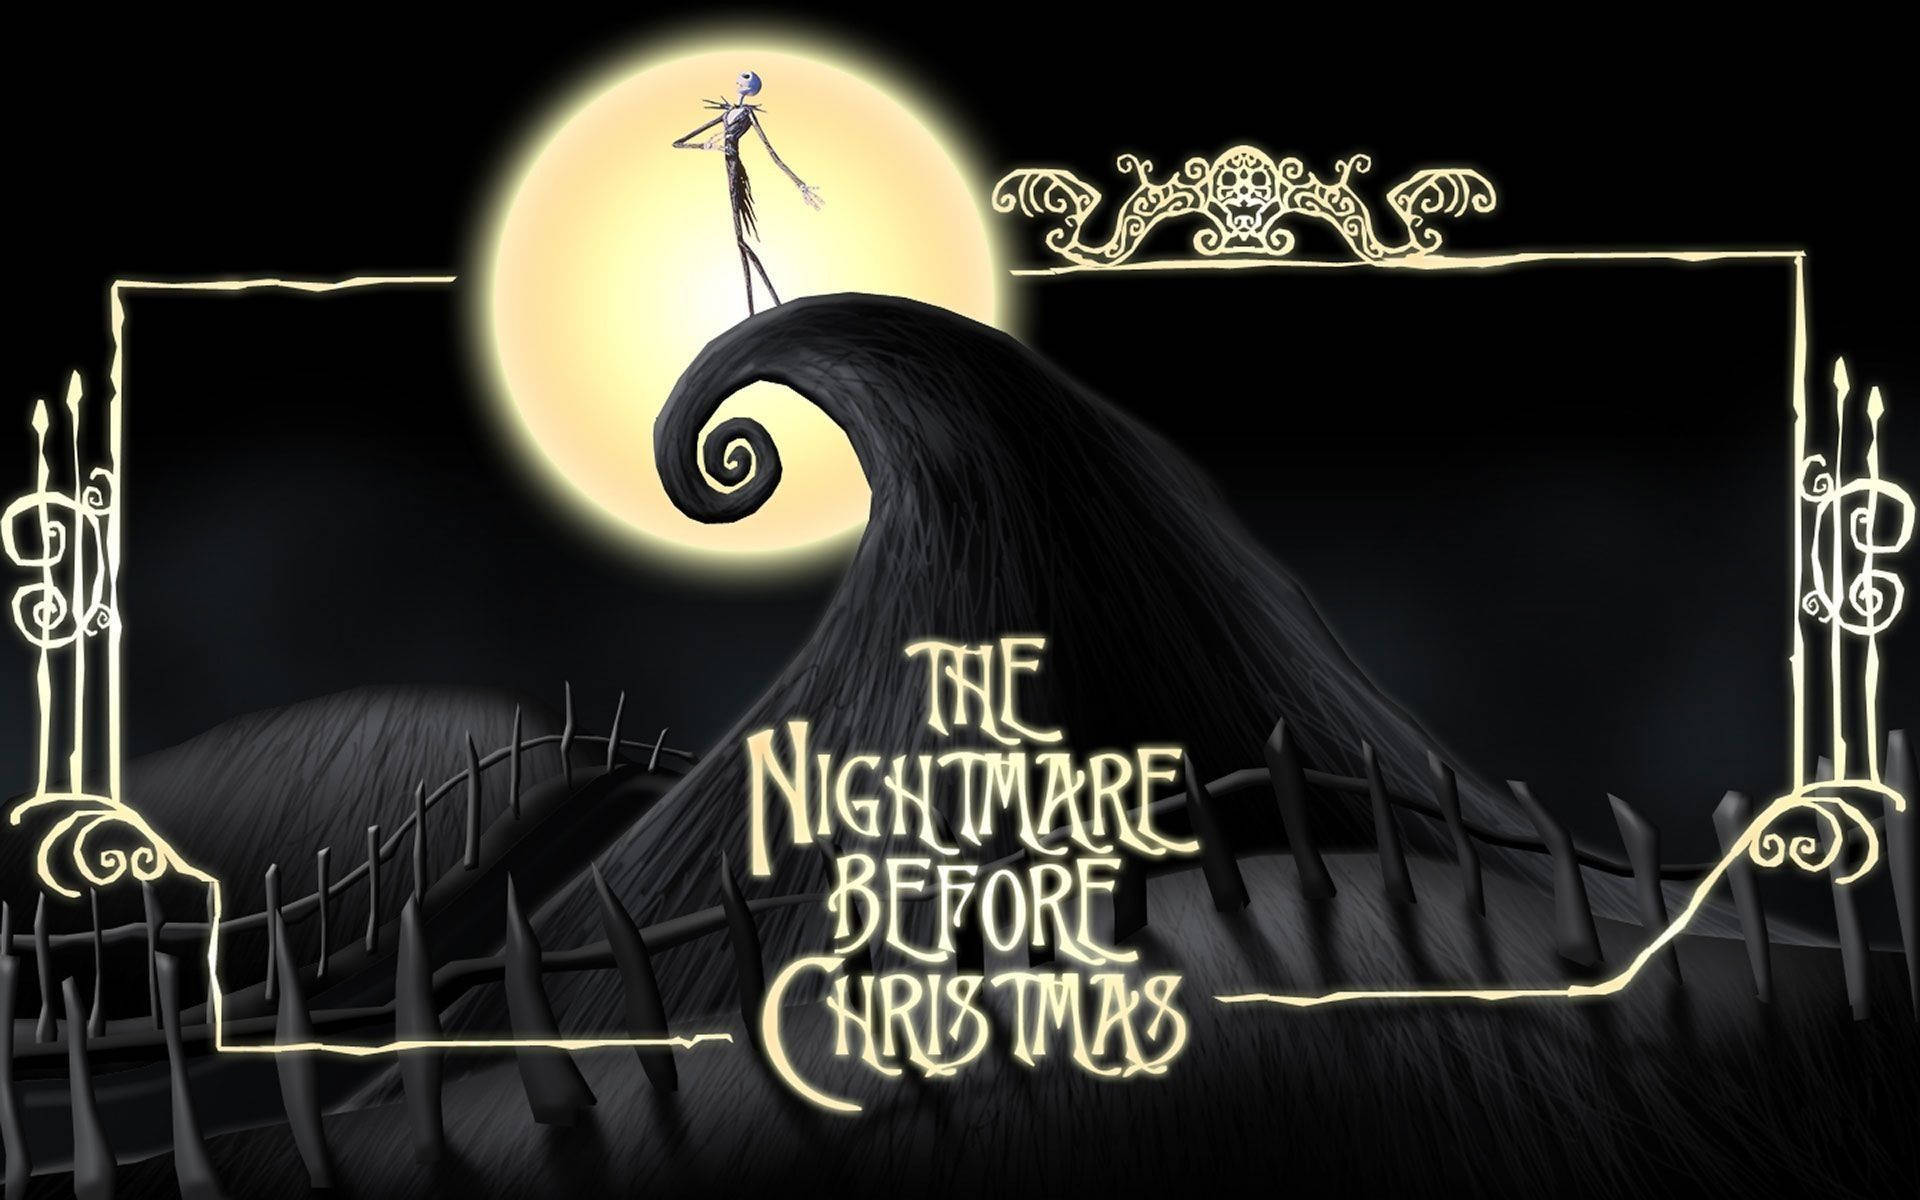 50 The Nightmare Before Christmas HD Wallpapers and Backgrounds